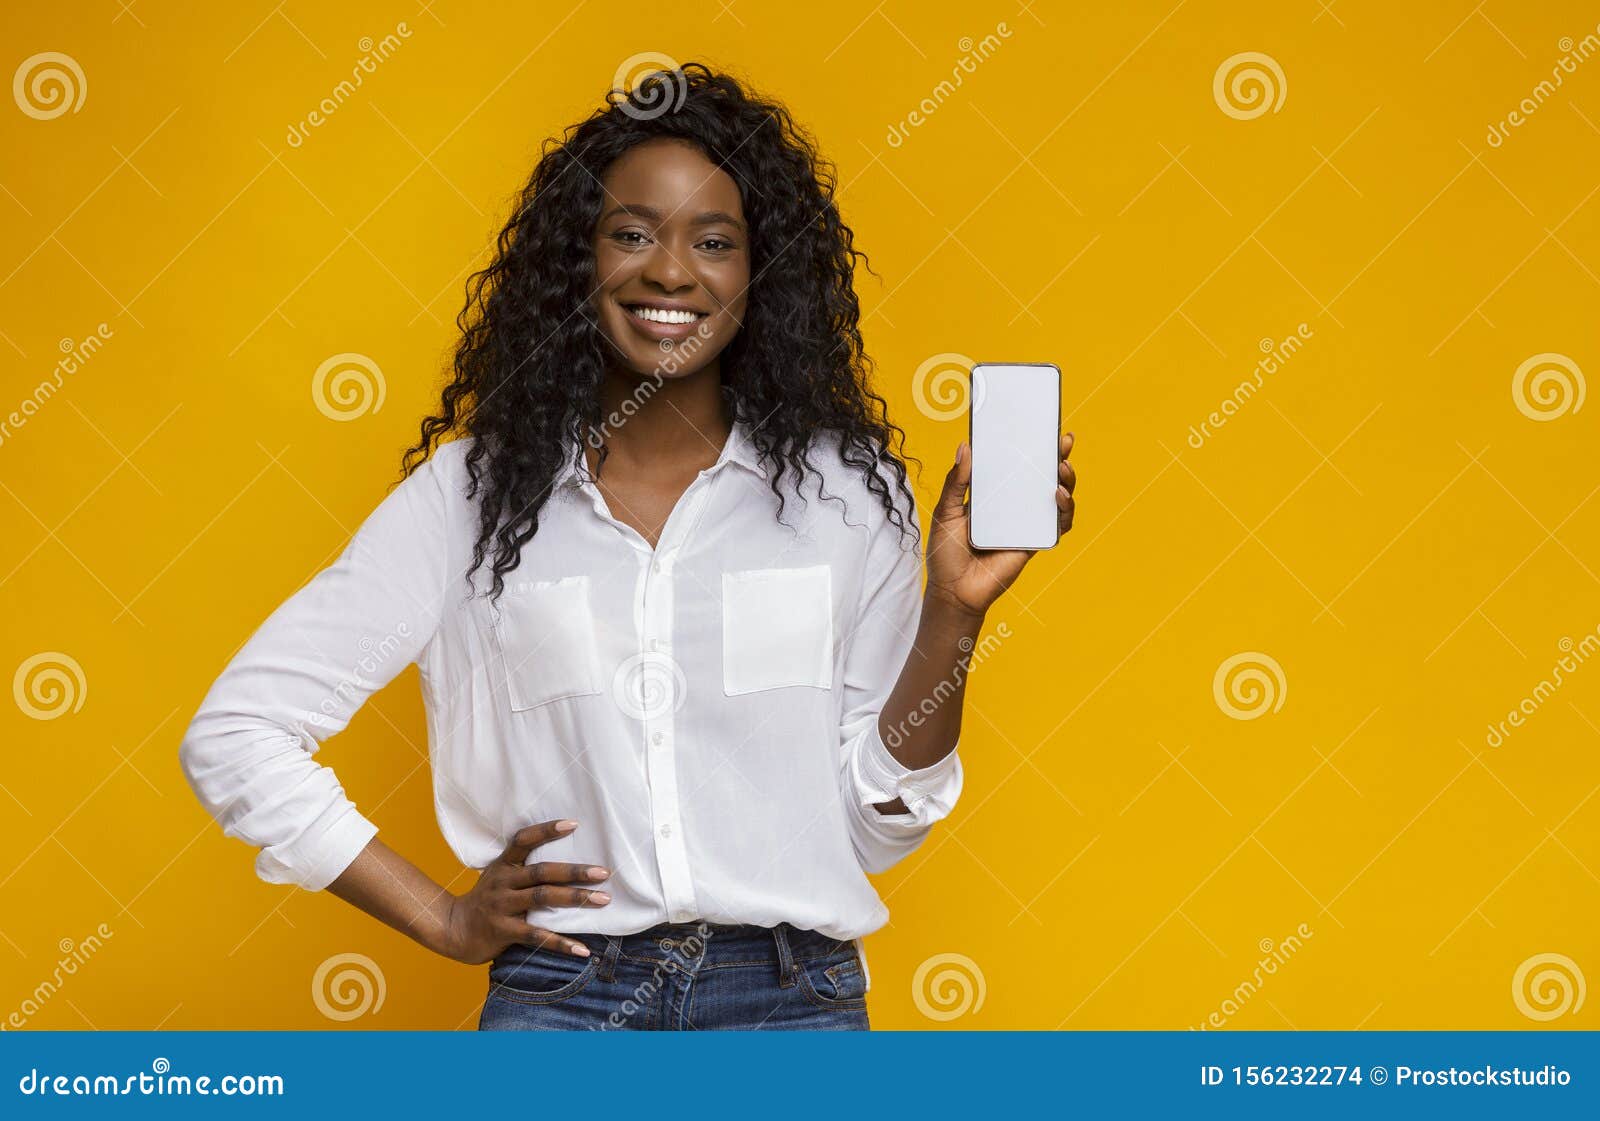 cheerful black woman showing latest slim cellphone